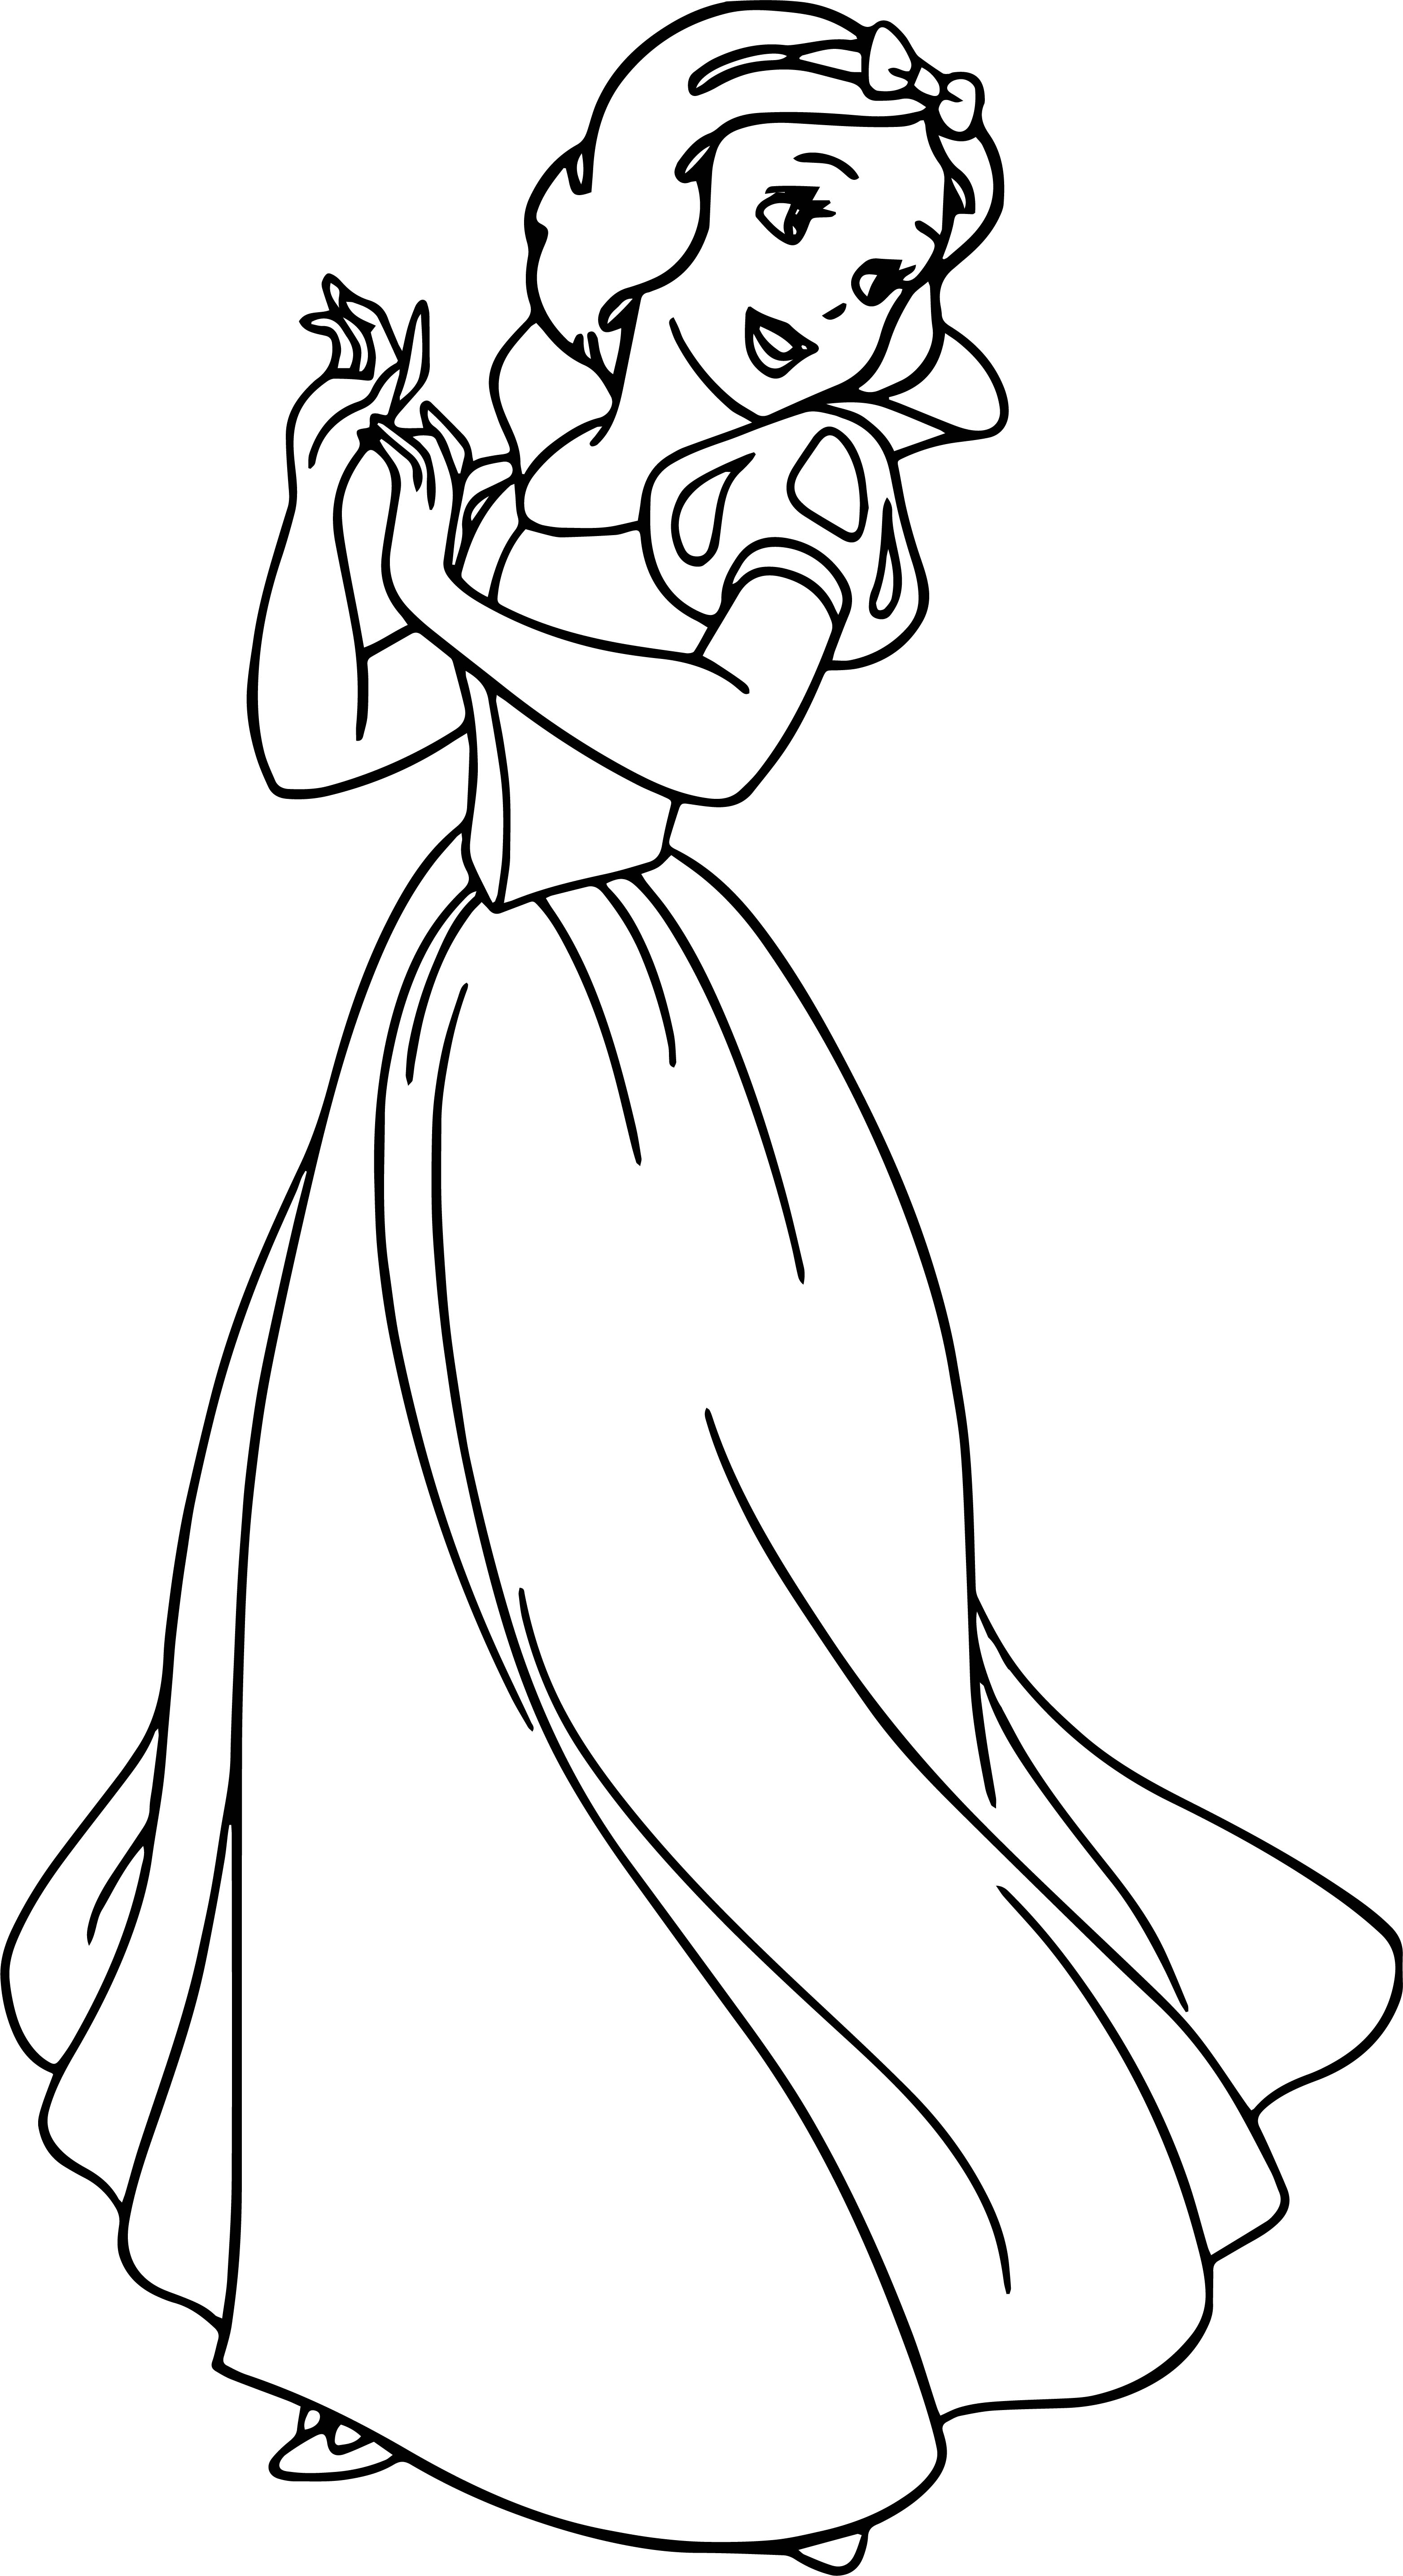 Snow White Turn Coloring Page